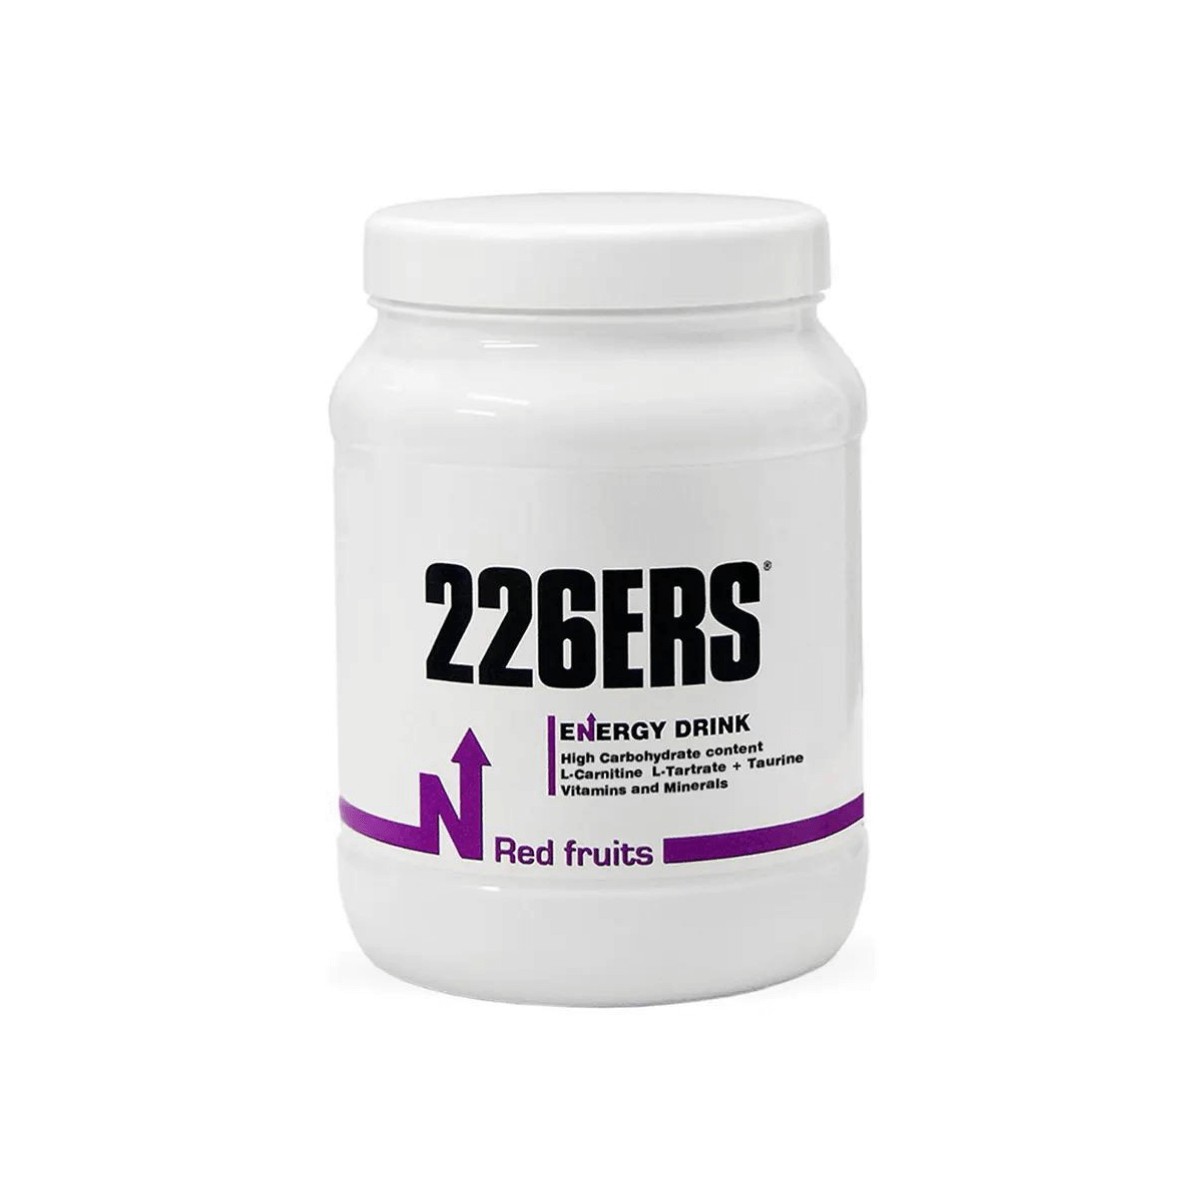 Energy Drink 226ERS - 0.5Kg Red Fruits